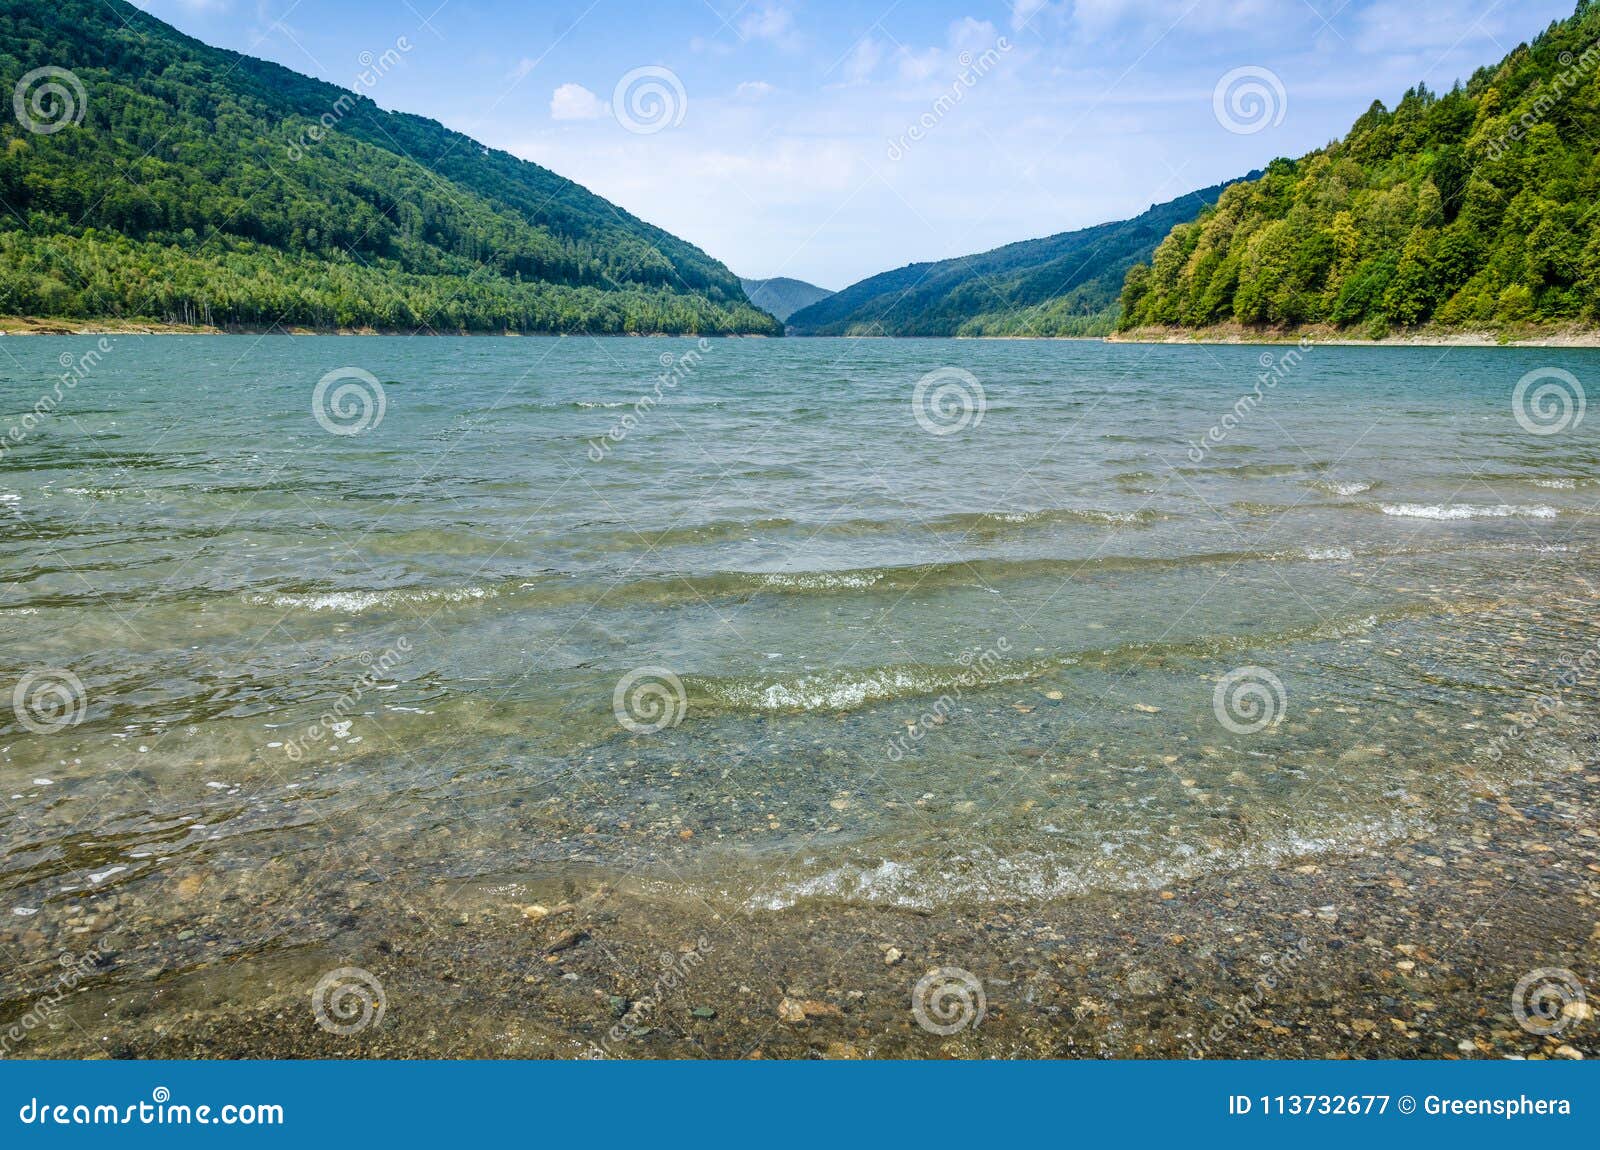 Mountain Lake Shore With Waves In Foreground, Cloudy Sky